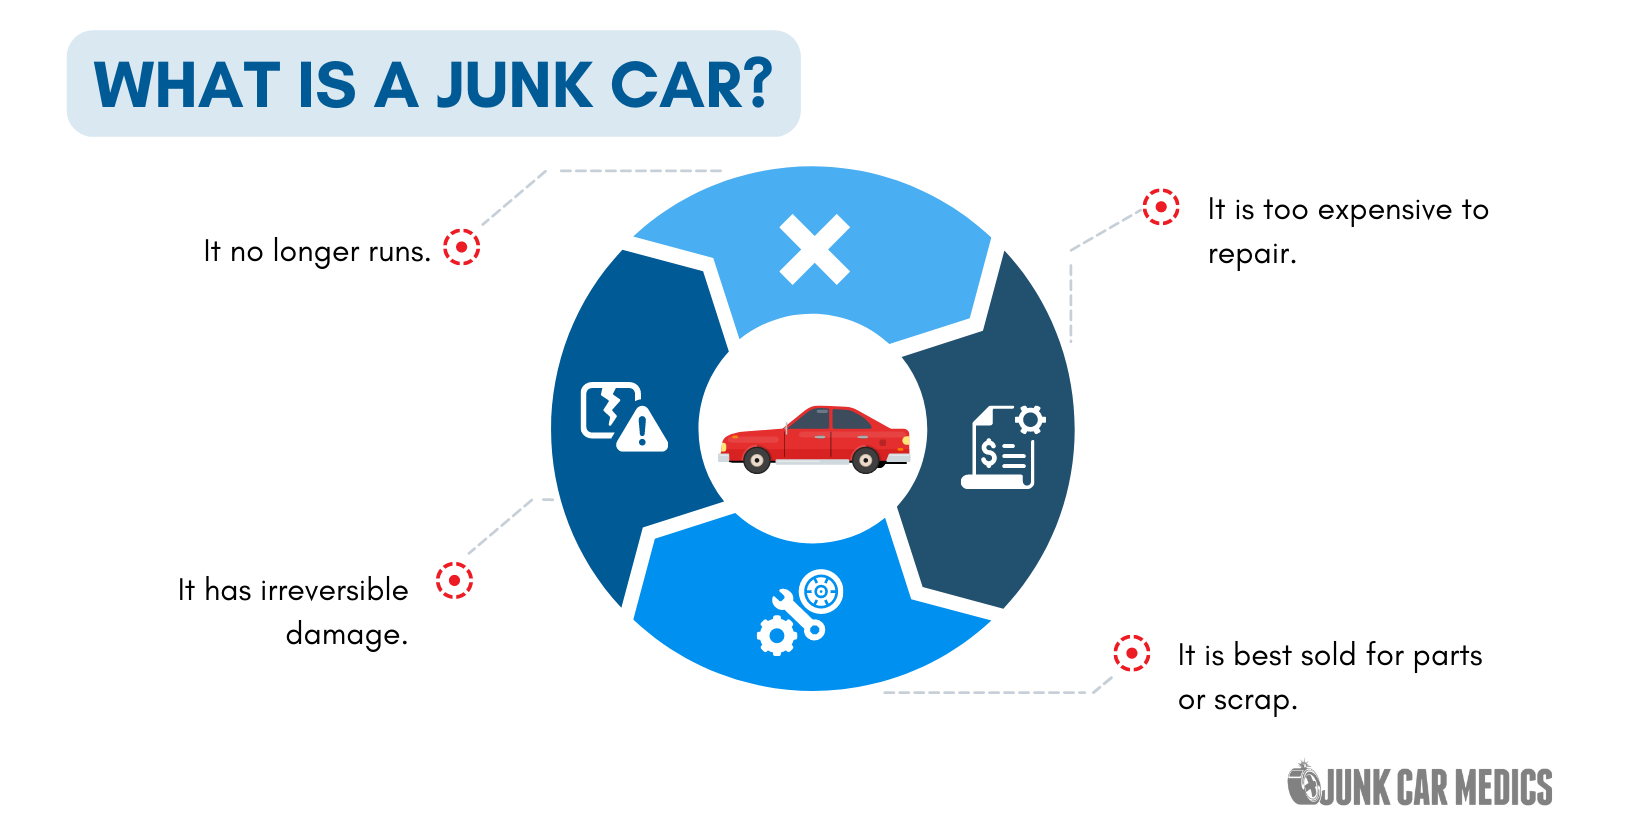 What is a Junk Car?